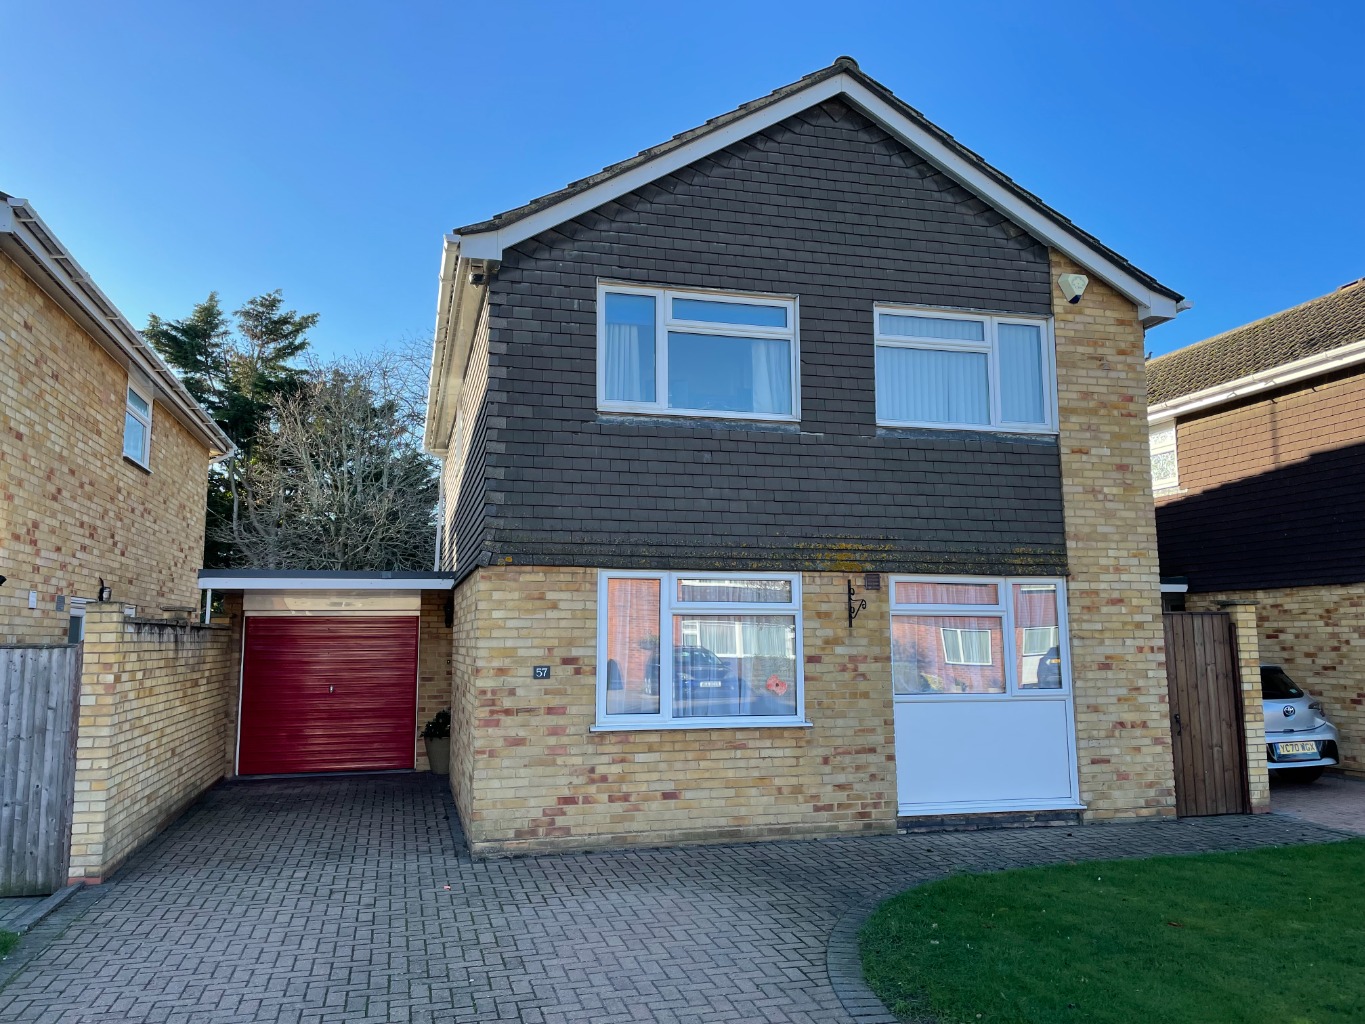 Detached four bedroom house with scope for extension, open plan kitchen/ diner, large lounge, downstairs W.C, attached garage and 60ft south facing garden.